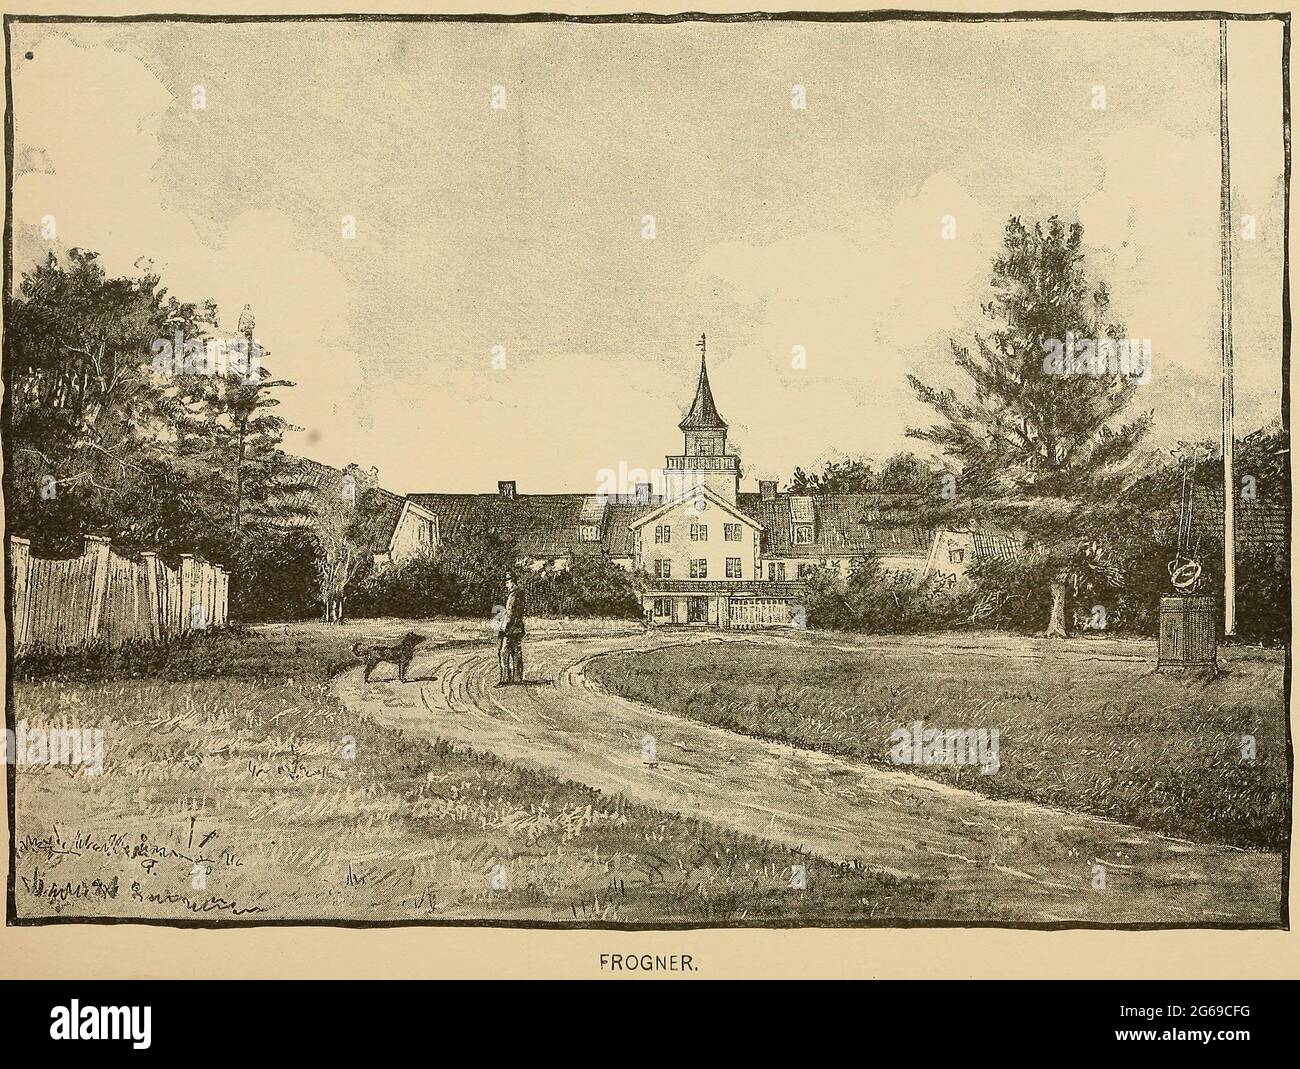 Frogner, Oslo, Norway  From the book ' The viking Bodleys; an excursion into Norway and Denmark ' by Horace Elisha Scudder Published in Boston, by Houghton, Mifflin and Company in 1885 from the BODLEY FAMILY series of books Stock Photo